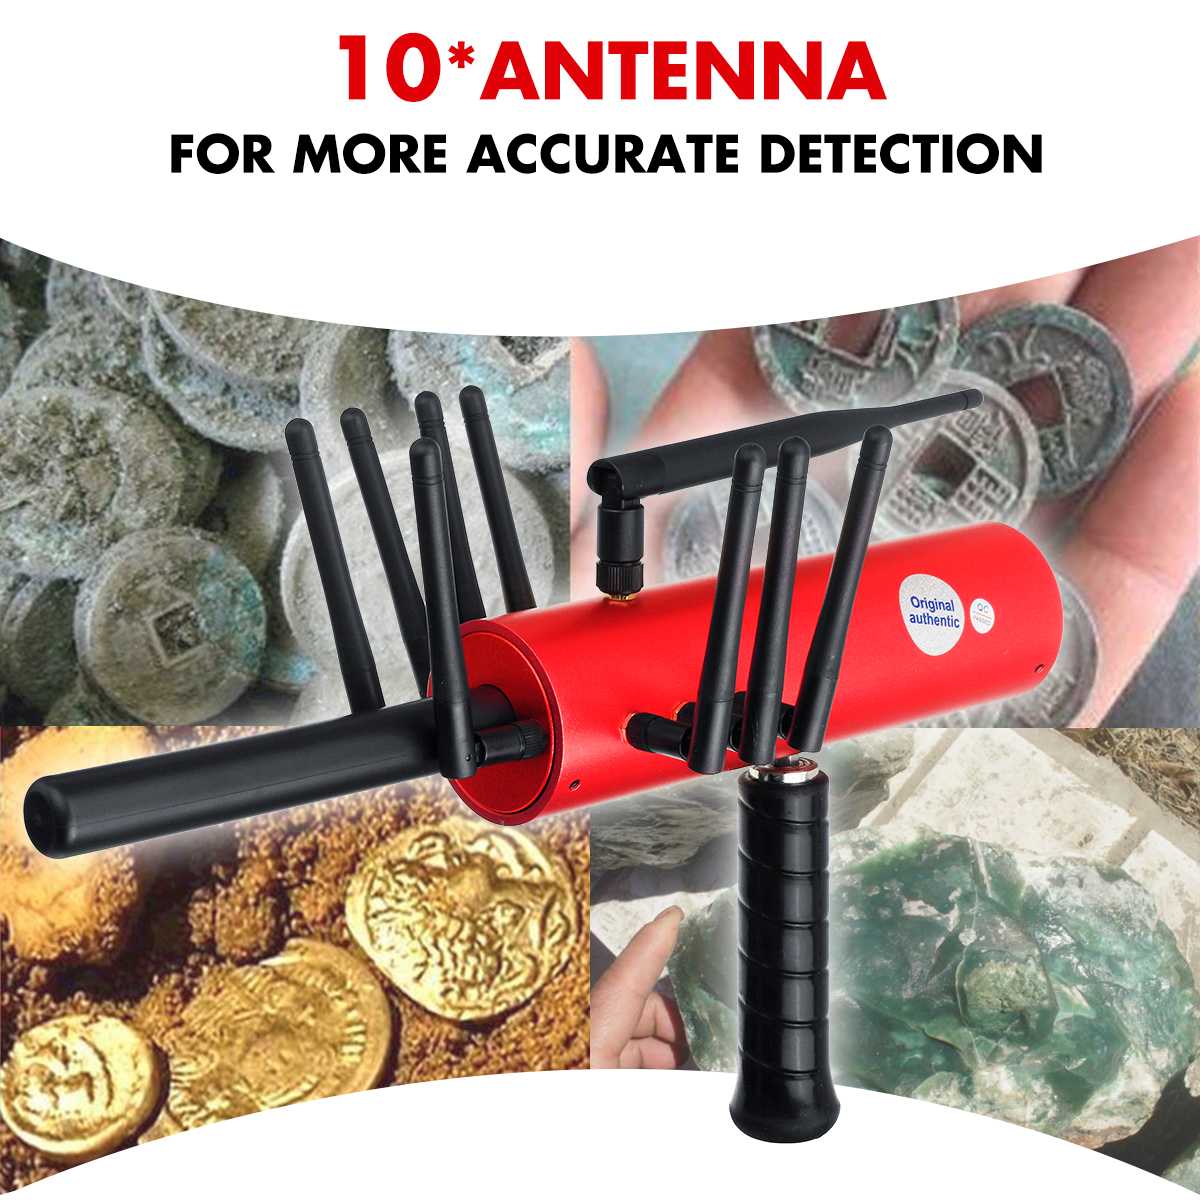 Professional Underground Metal Detector 10x Antenna High Sensitivity Gold Detector Digger Large-scale Scanner Prospecting Tools